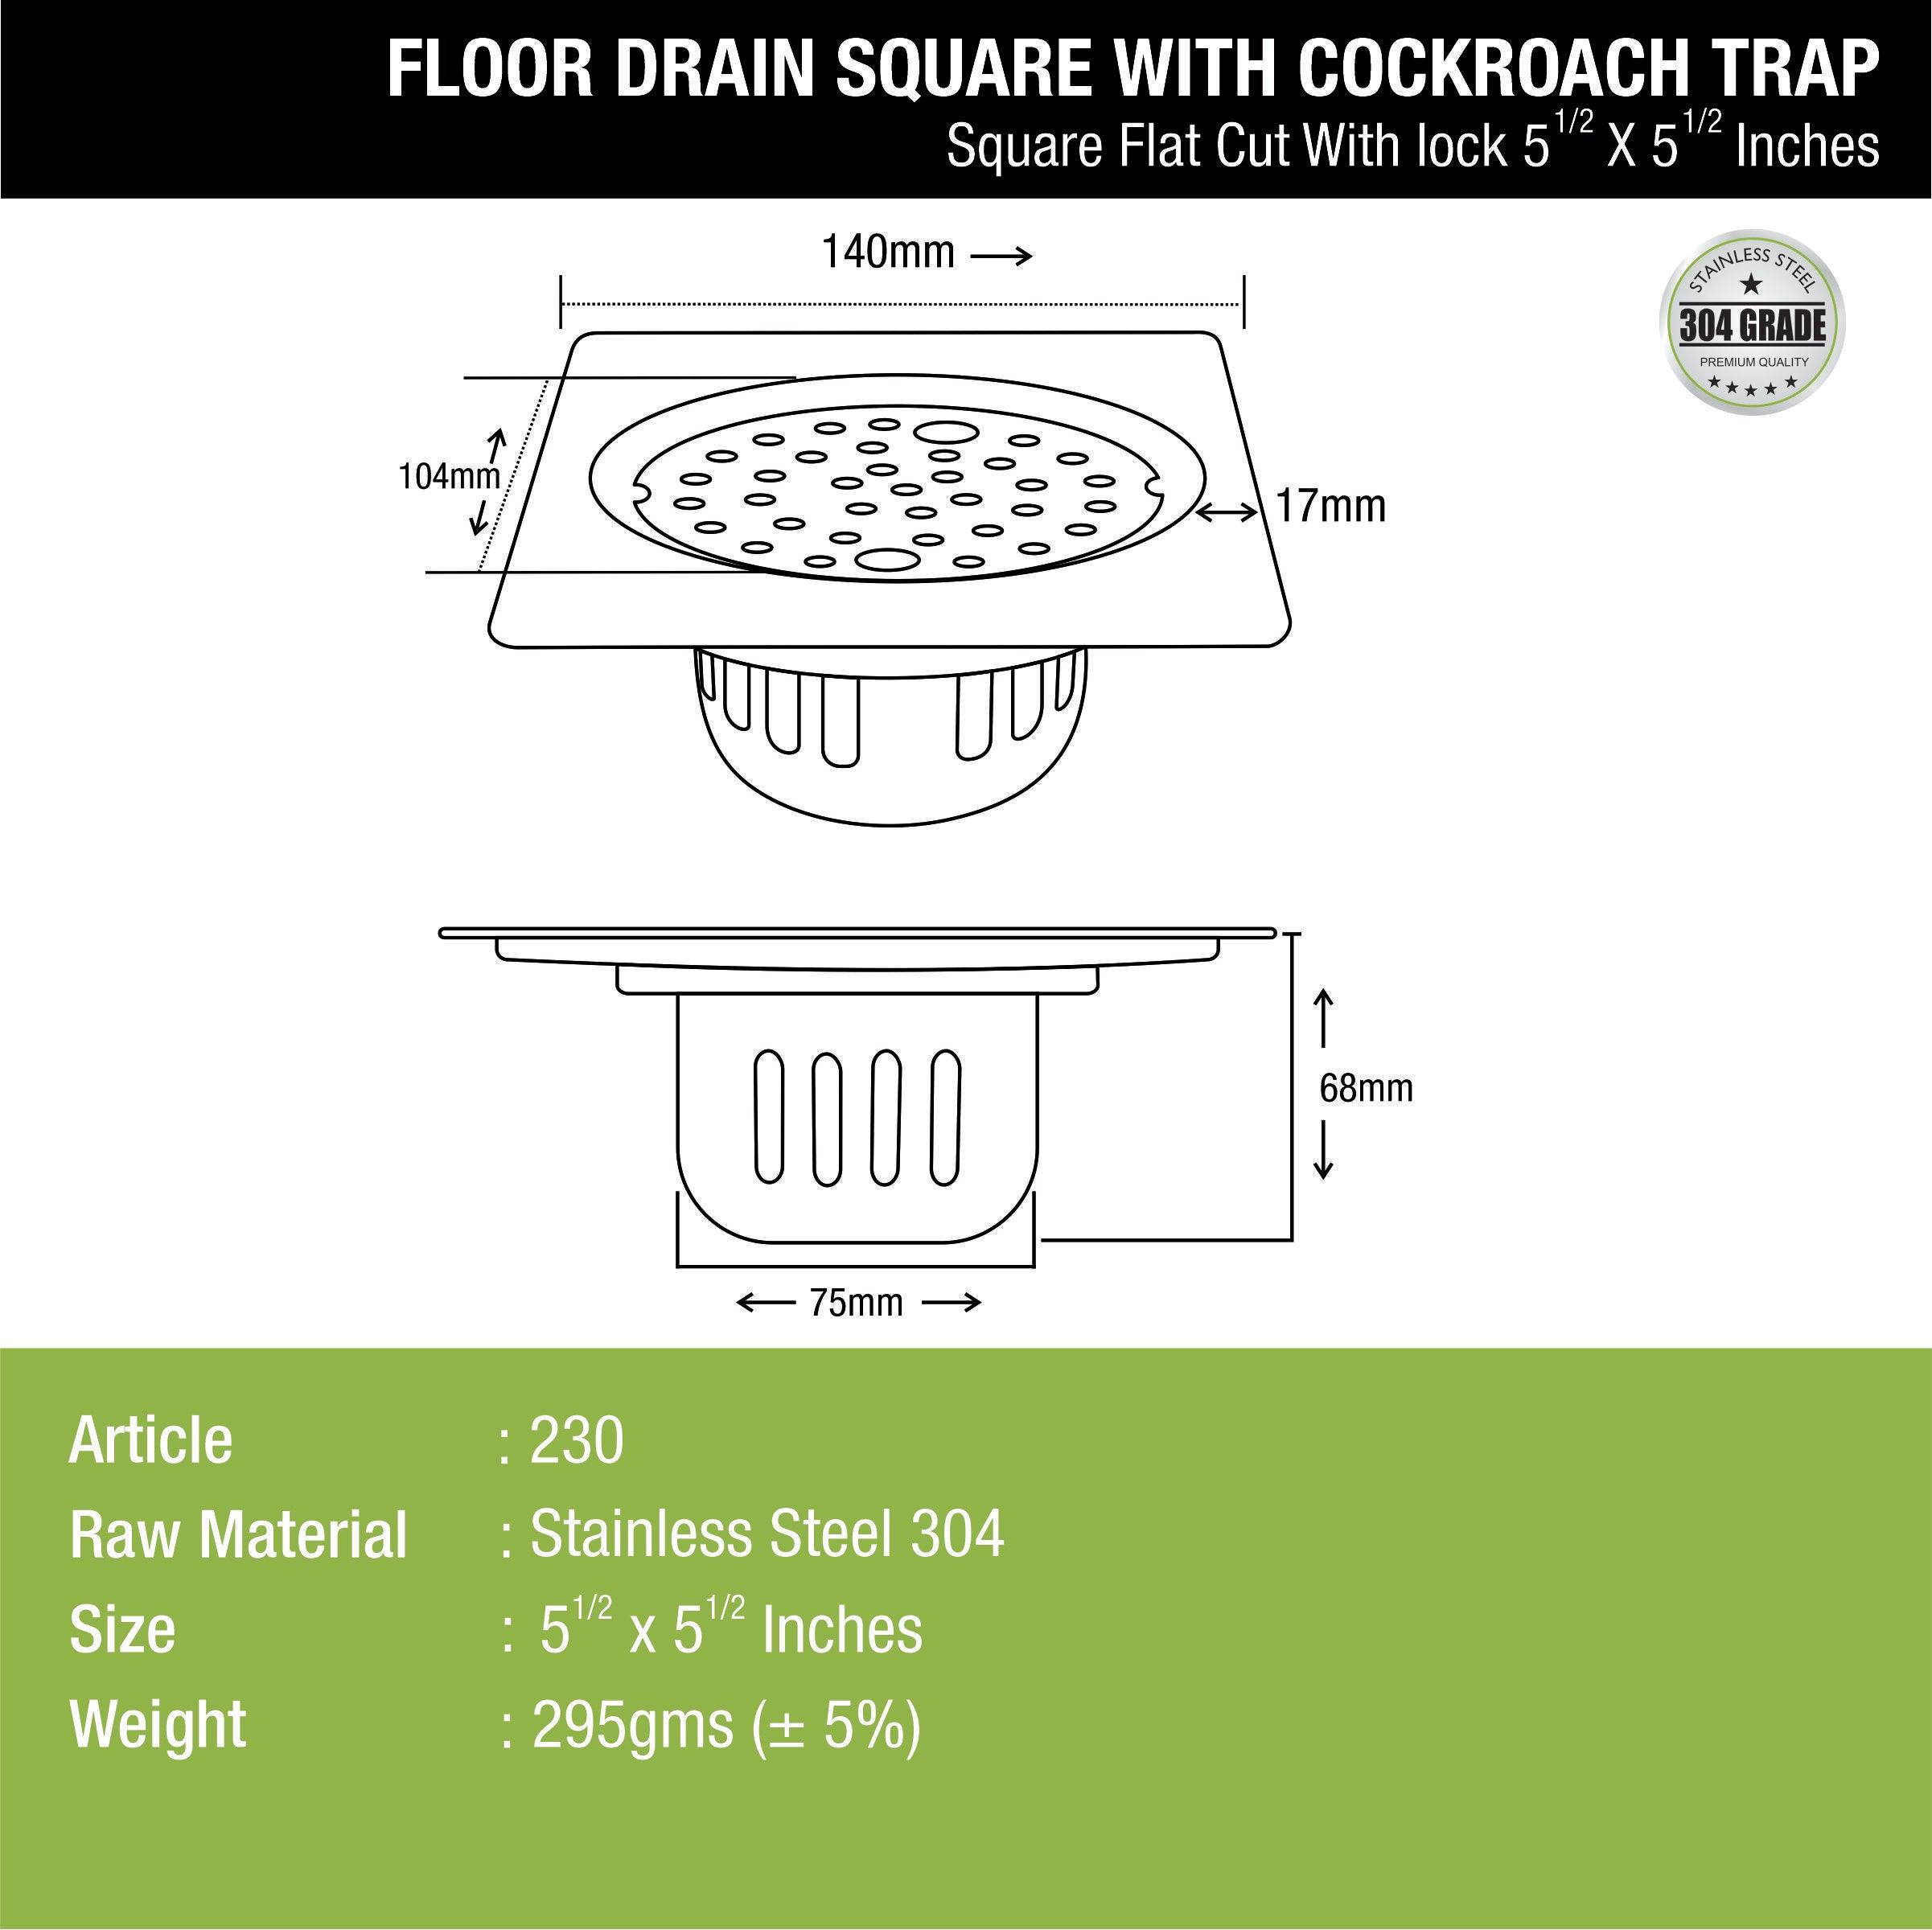 Square Flat Cut Floor Drain (5.5 x 5.5 Inches) with Lock and Cockroach Trap - LIPKA - Lipka Home